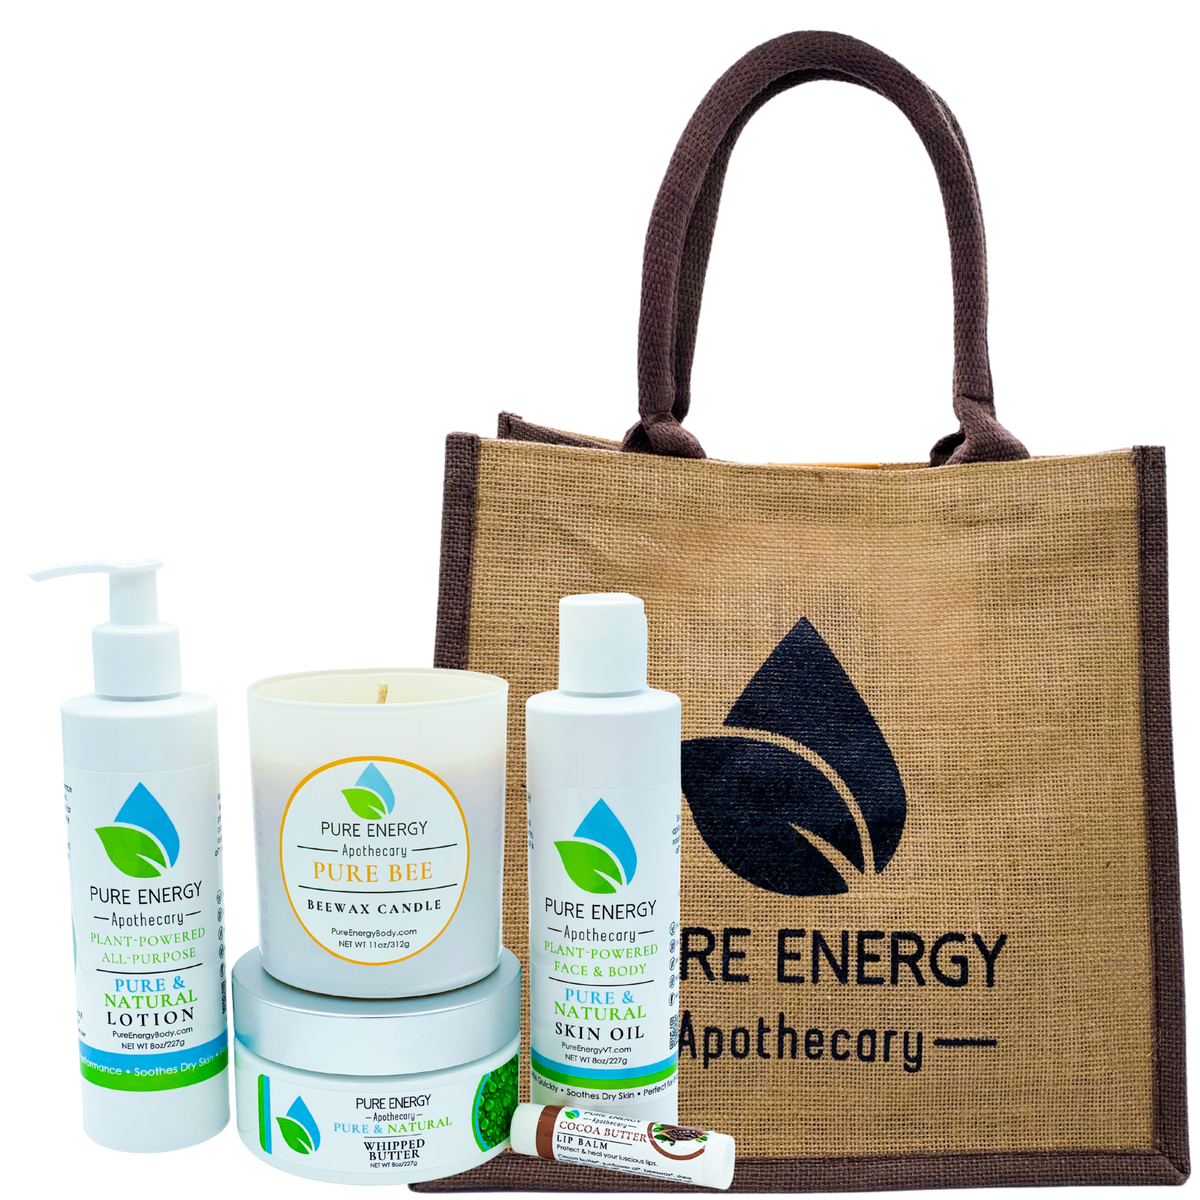 Pure & Natural Gratitude Gift Set by Pure Energy Apothecary